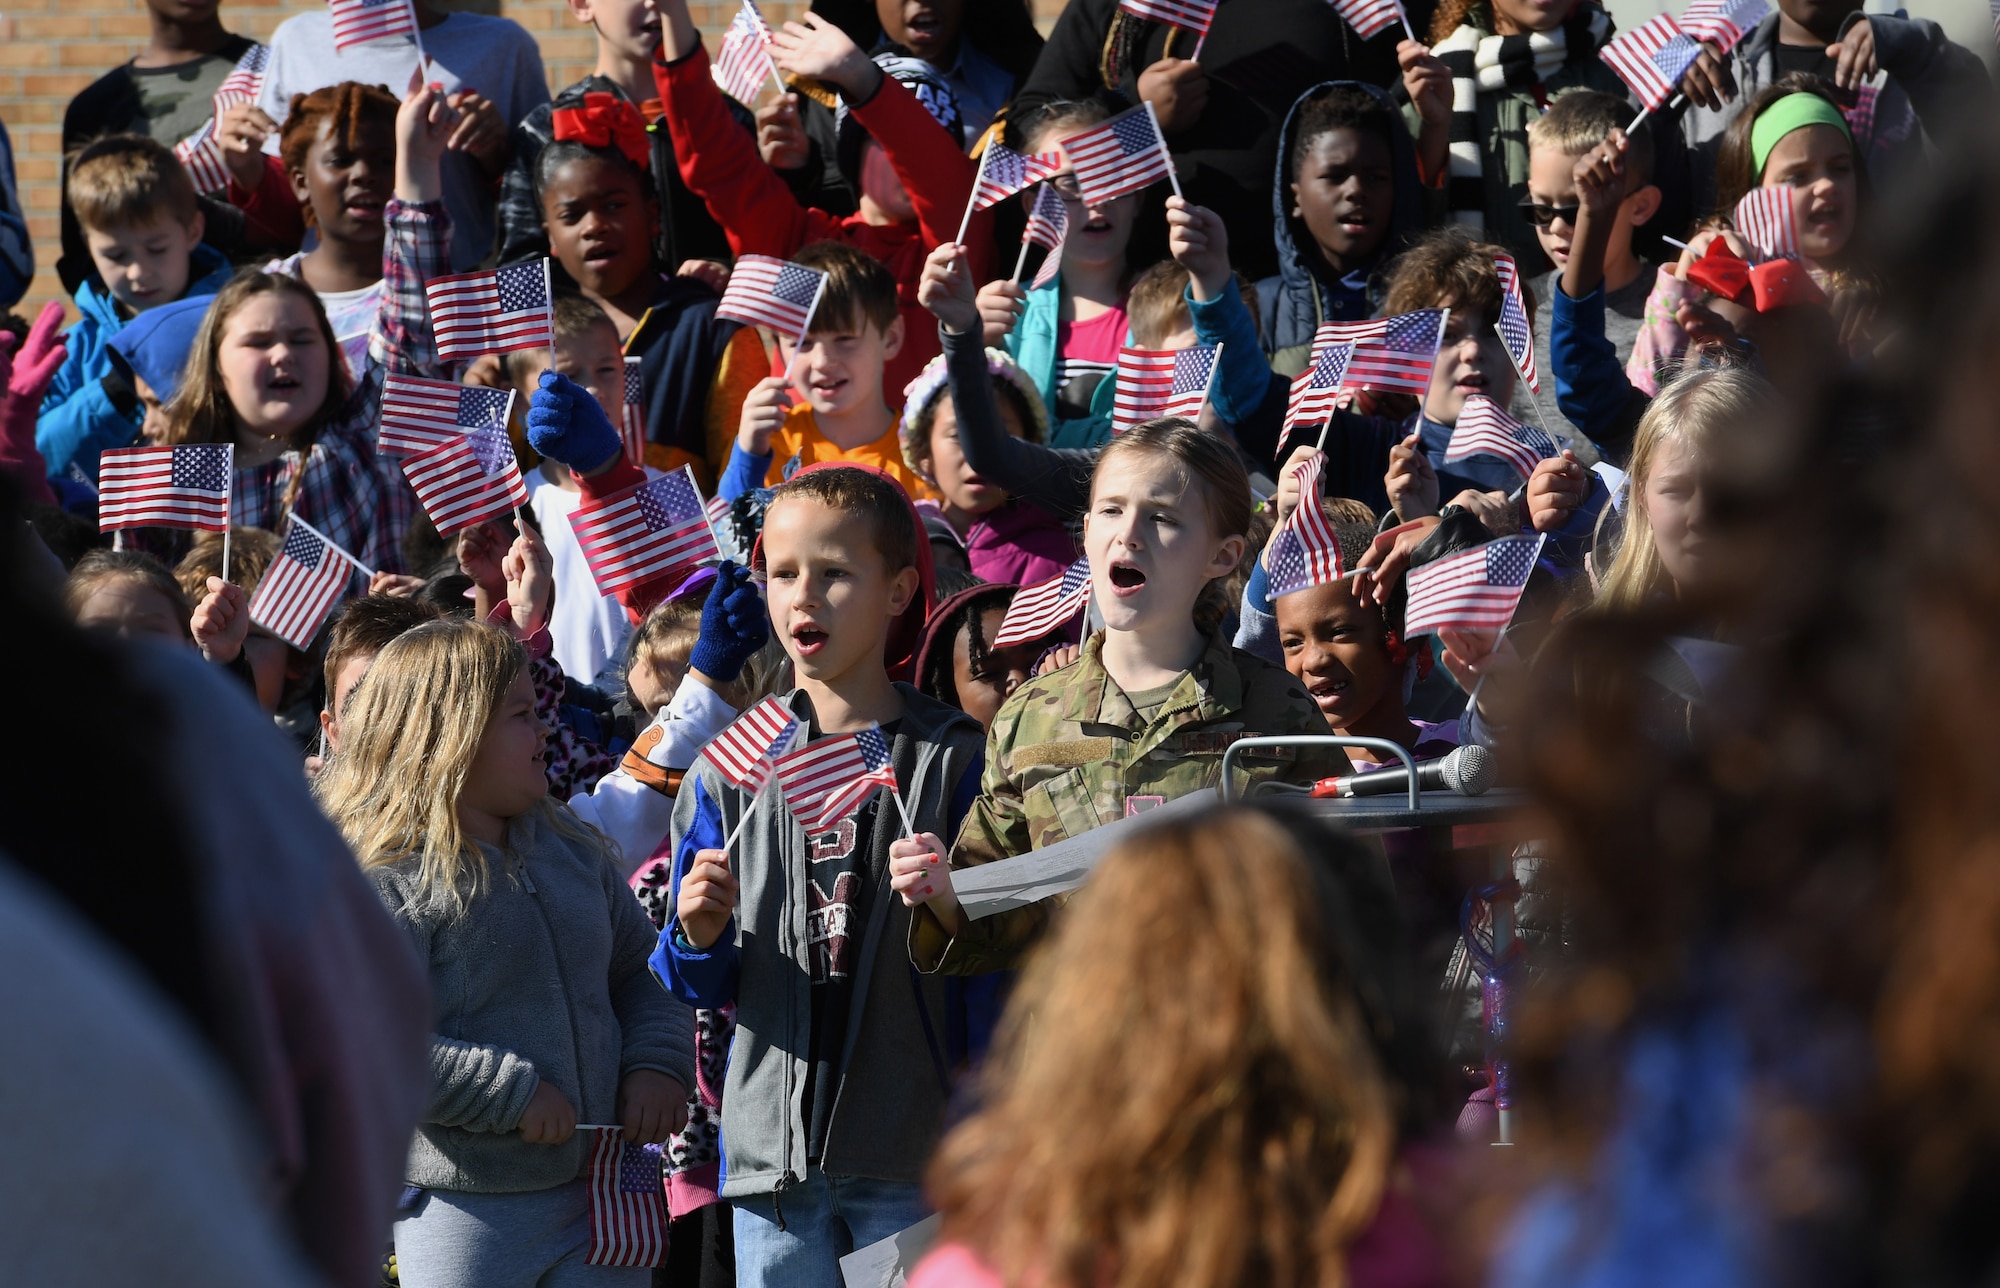 Students at Jeff Davis Elementary School sing patriotic songs during a Veterans Day celebration in Biloxi, Mississippi, Nov. 15, 2019. During the event, students also recited the Pledge of Allegiance. Keesler Air Force Base leadership and base personnel attended the event. (U.S. Air Force photo by Kemberly Groue)